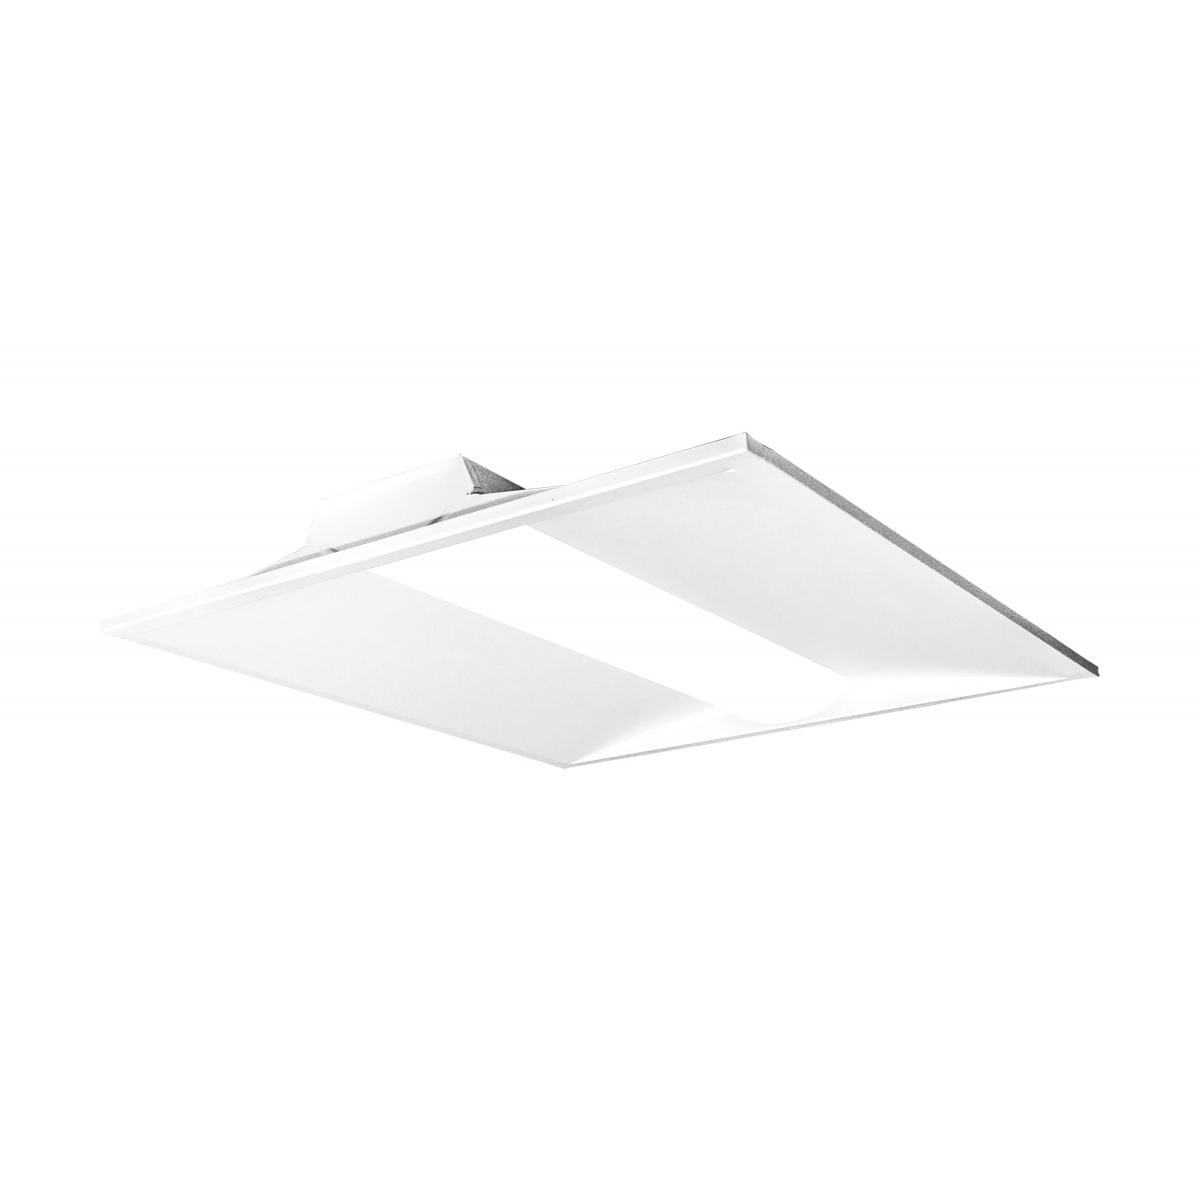 Picture of Satco Nuvo 3008618 23.74 in. T8 100 watt LED Troffer Fixture